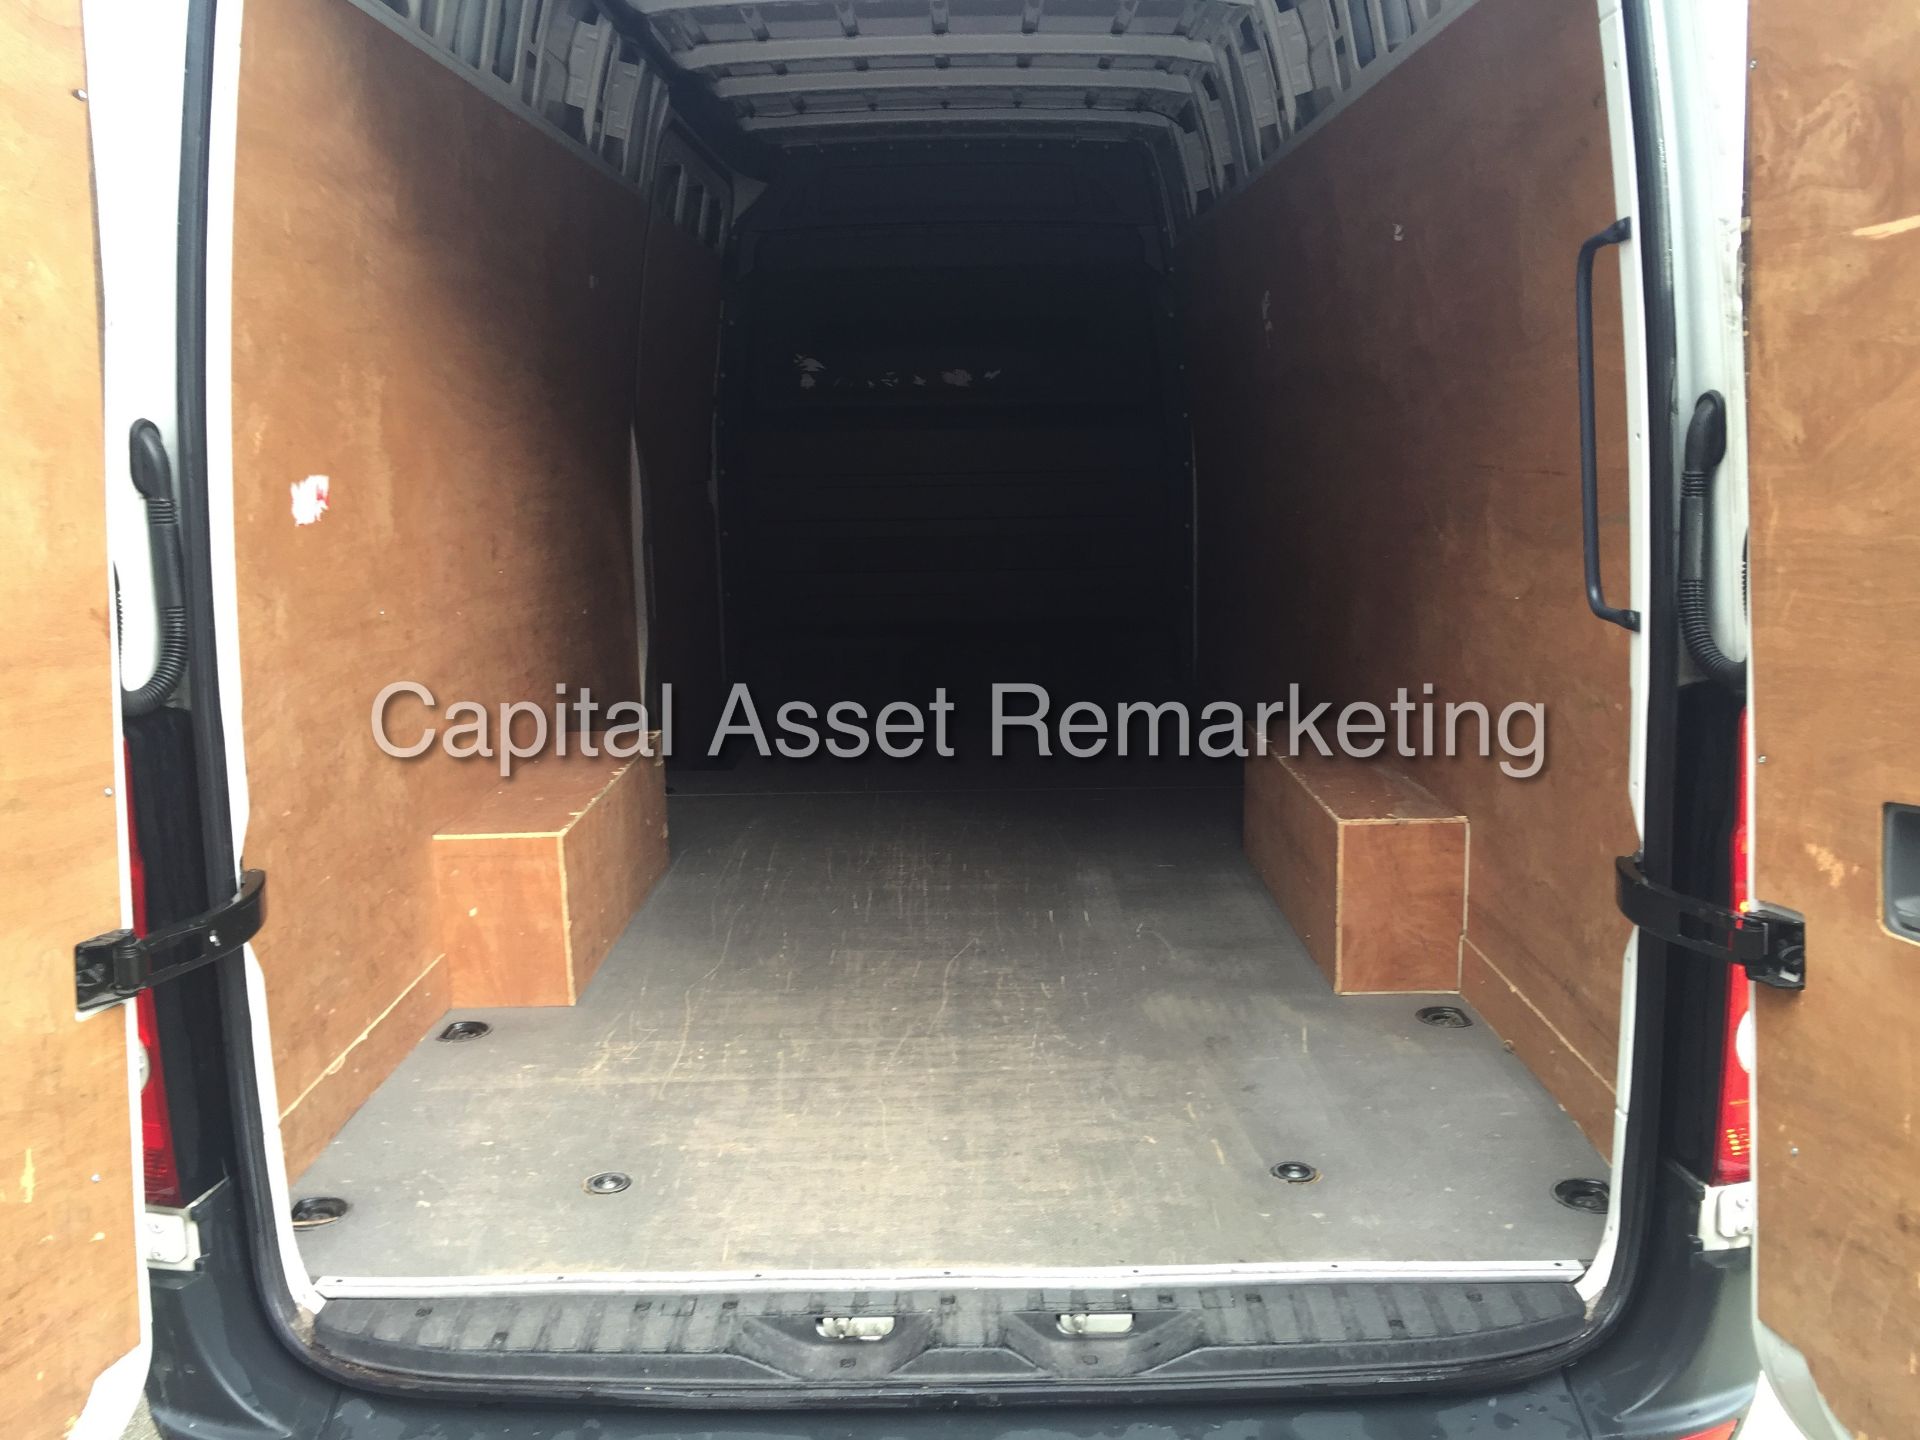 VW CRAFTER CR35 (2014 MODEL) LWB HI-ROOF '2.0 TDI - 109 BHP - 6 SPEED'  (1 OWNER FROM NEW) - Image 10 of 13